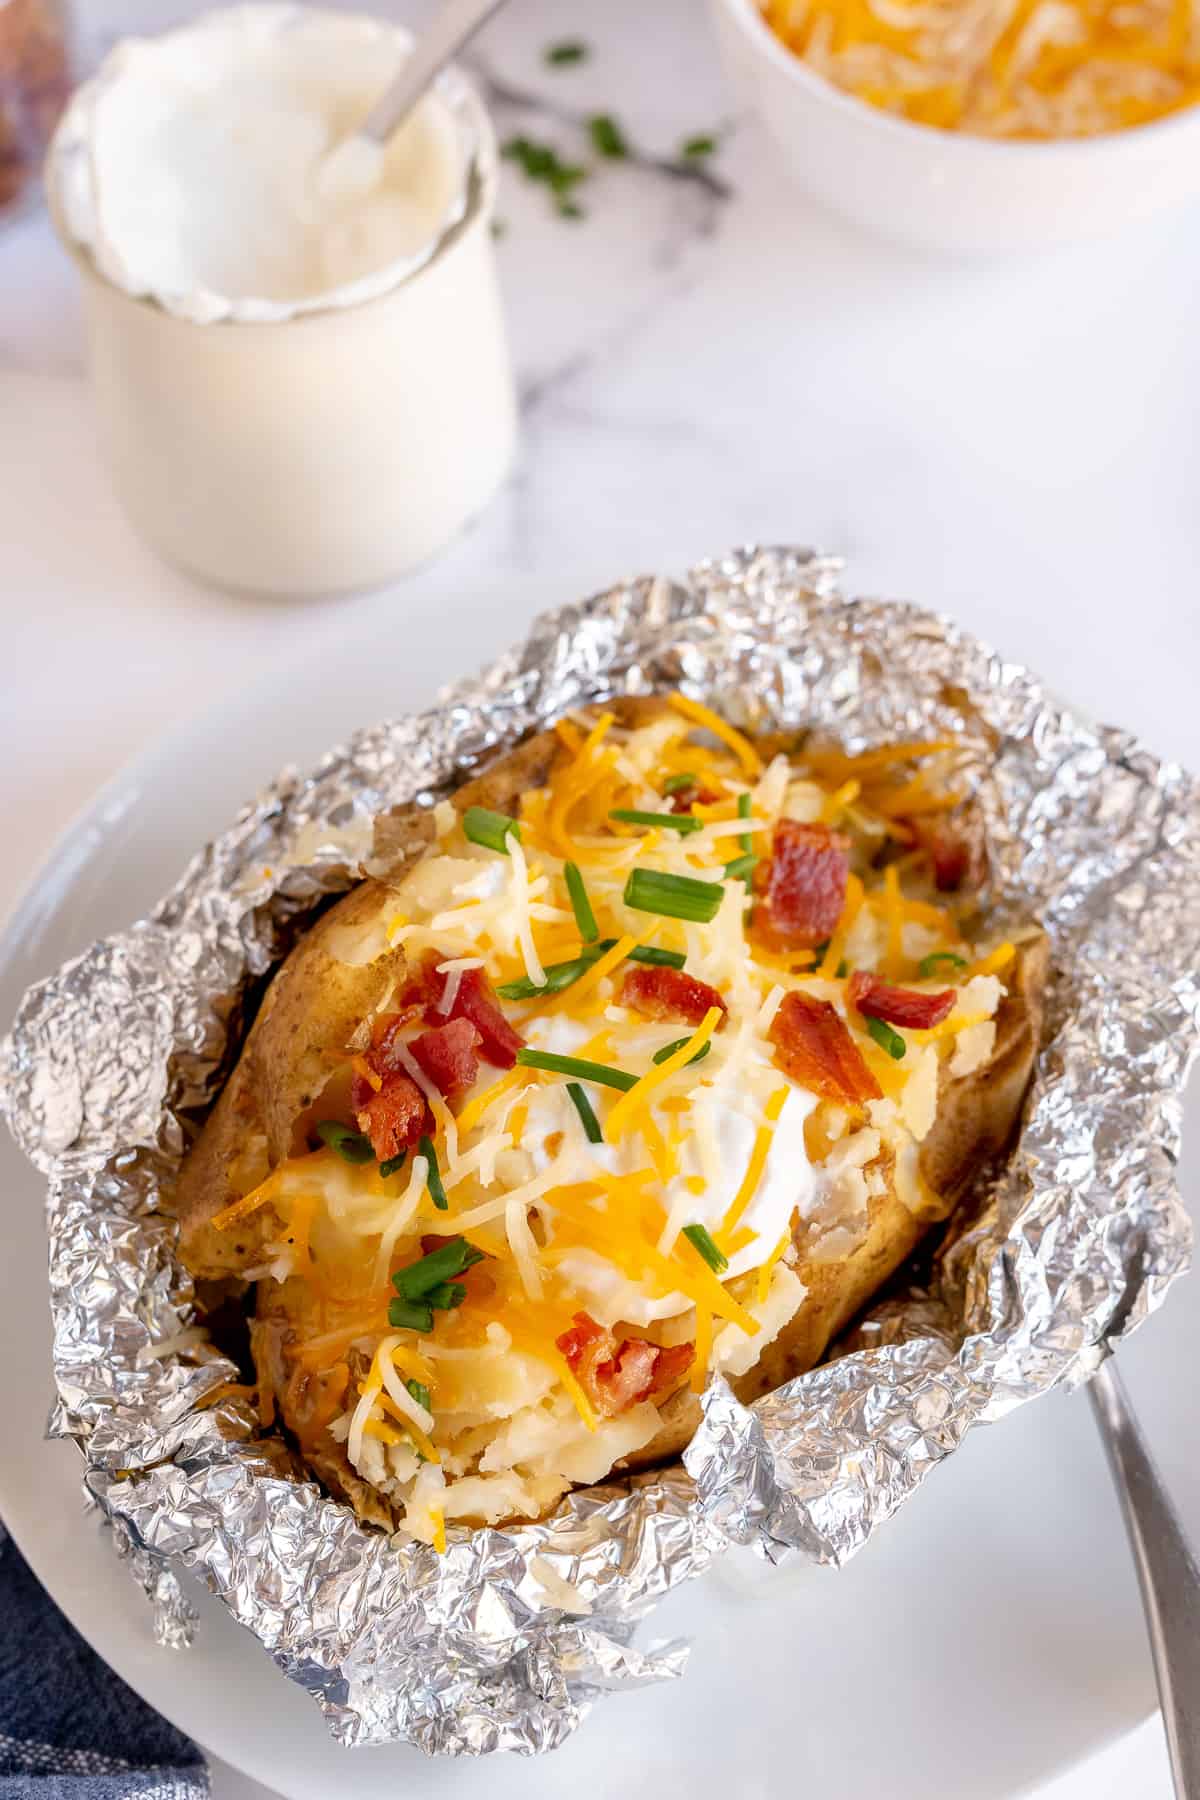 A baked potato with sour cream, cheese, and bacon on top of a sheet of foil.